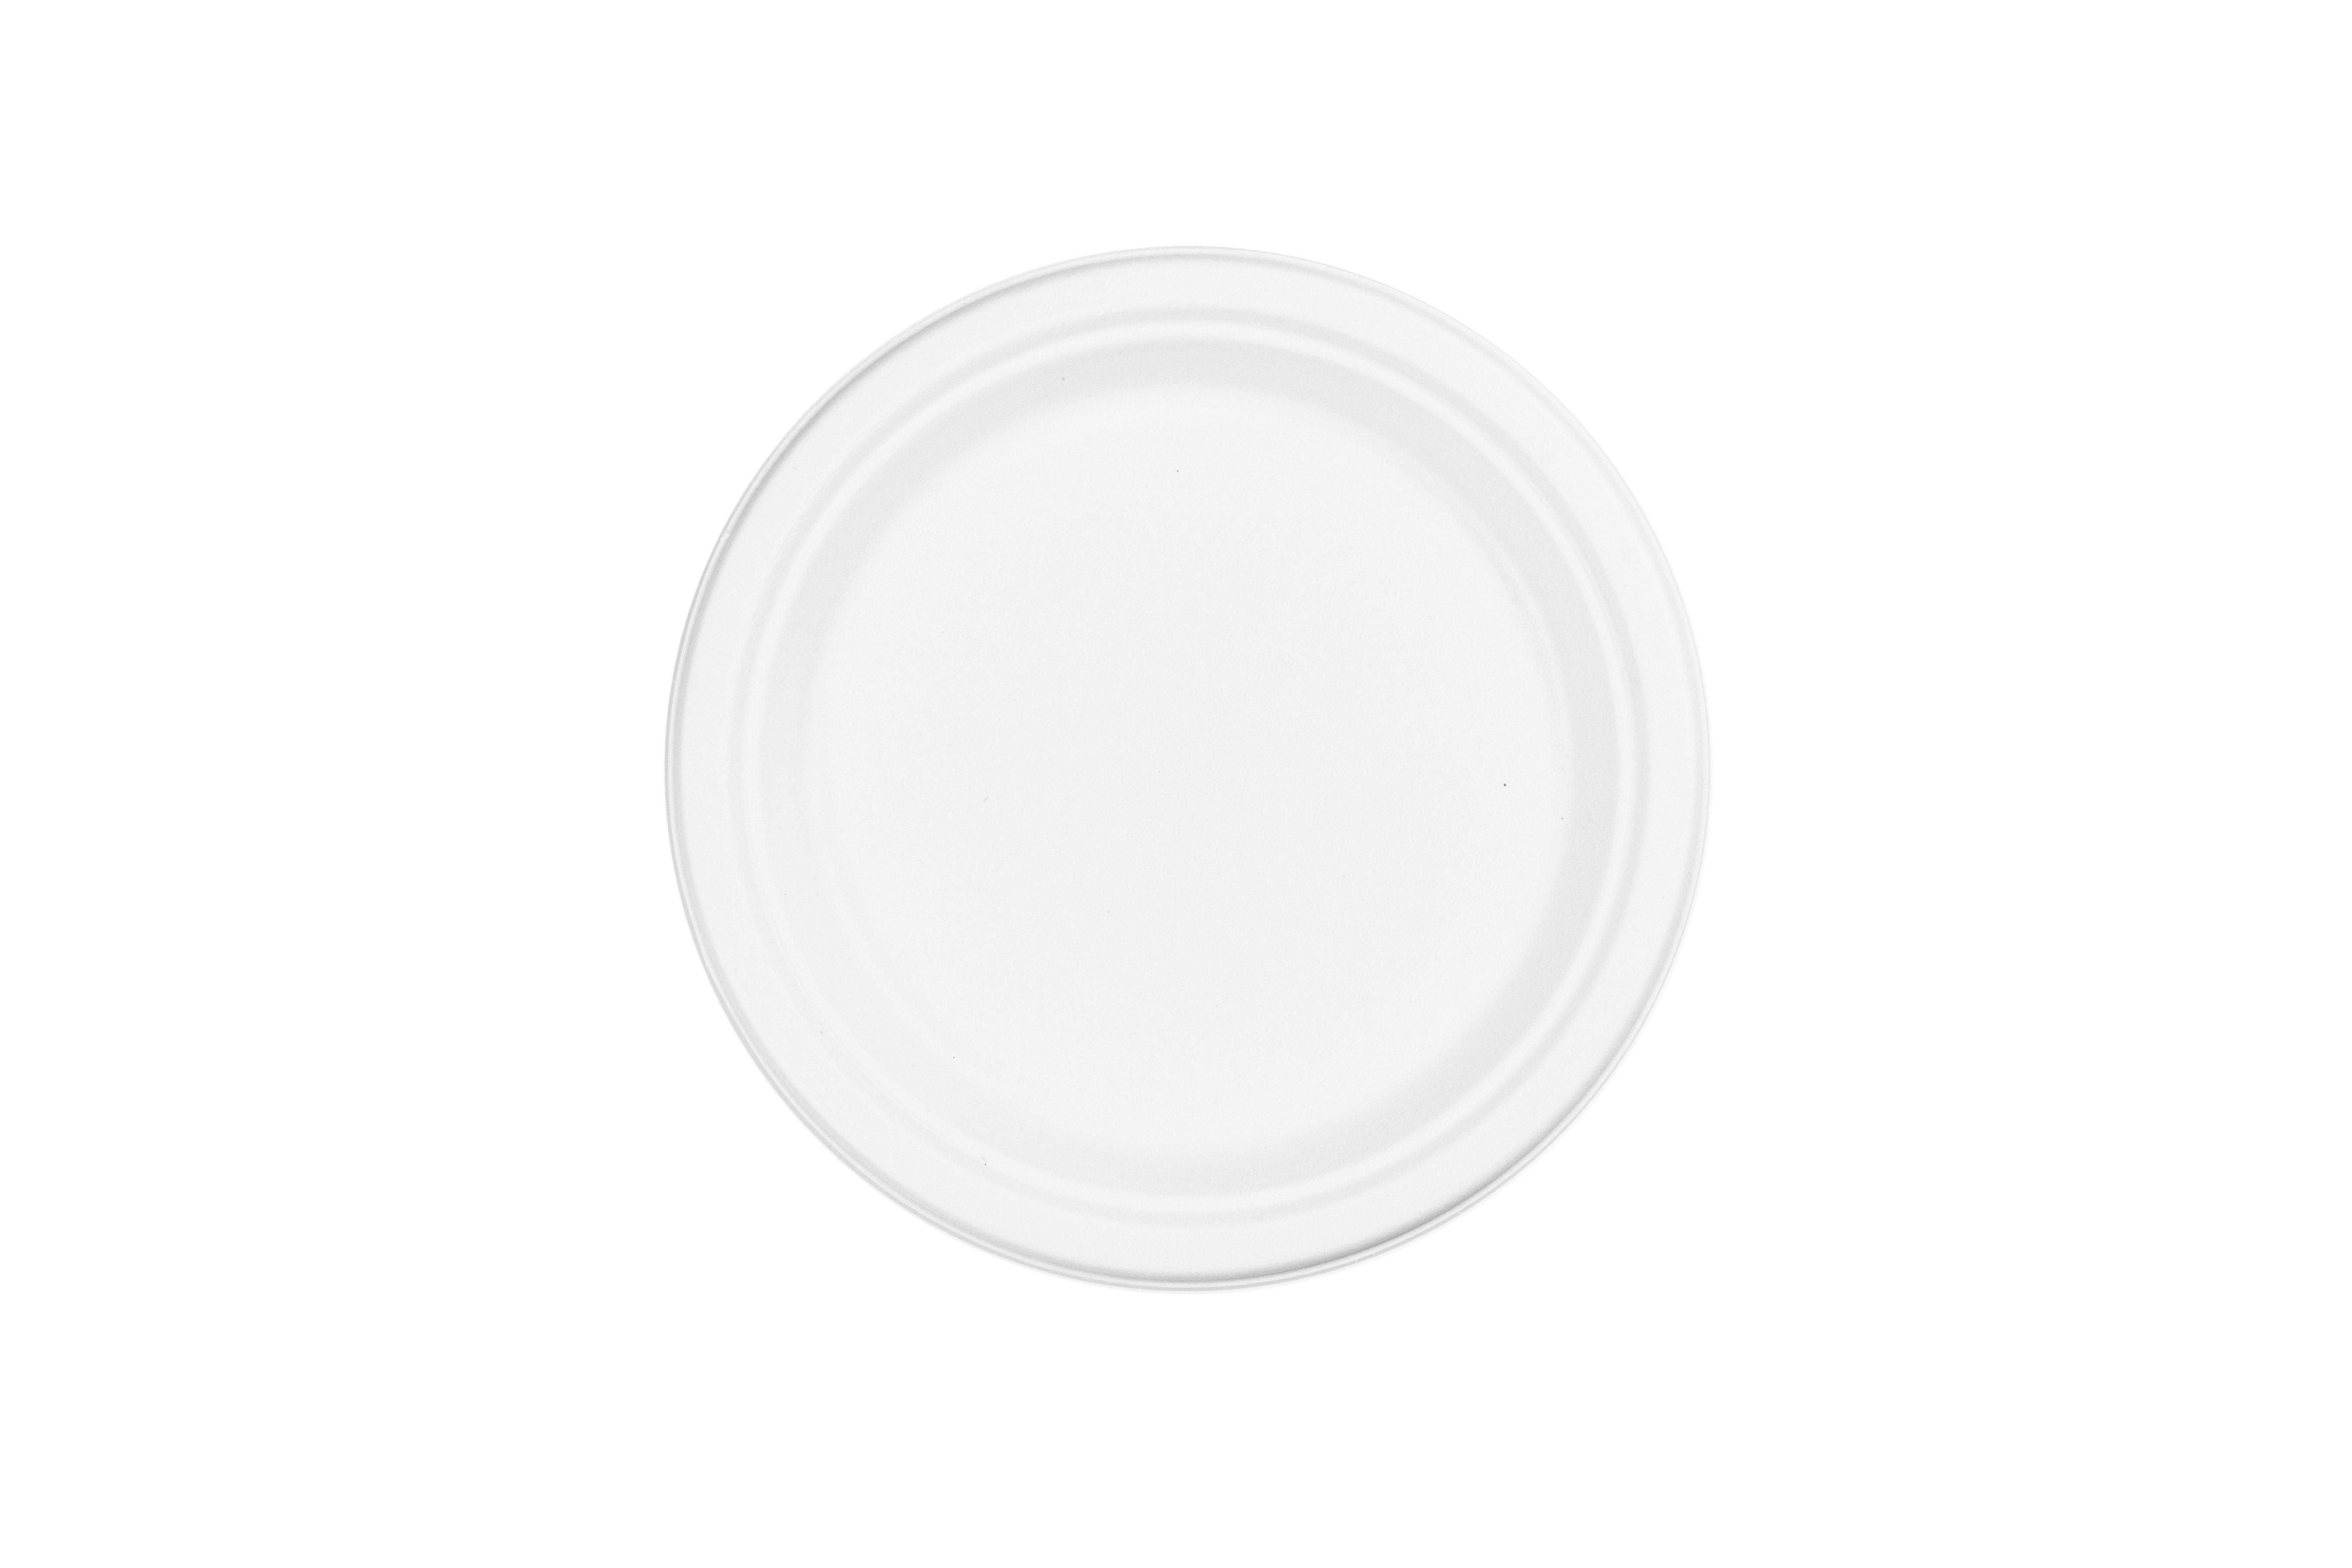 Stock Your Home 6-Inch Paper Plates Uncoated, Everyday Disposable Dessert  Plates 6 Paper Plate Bulk, White, 300 Count